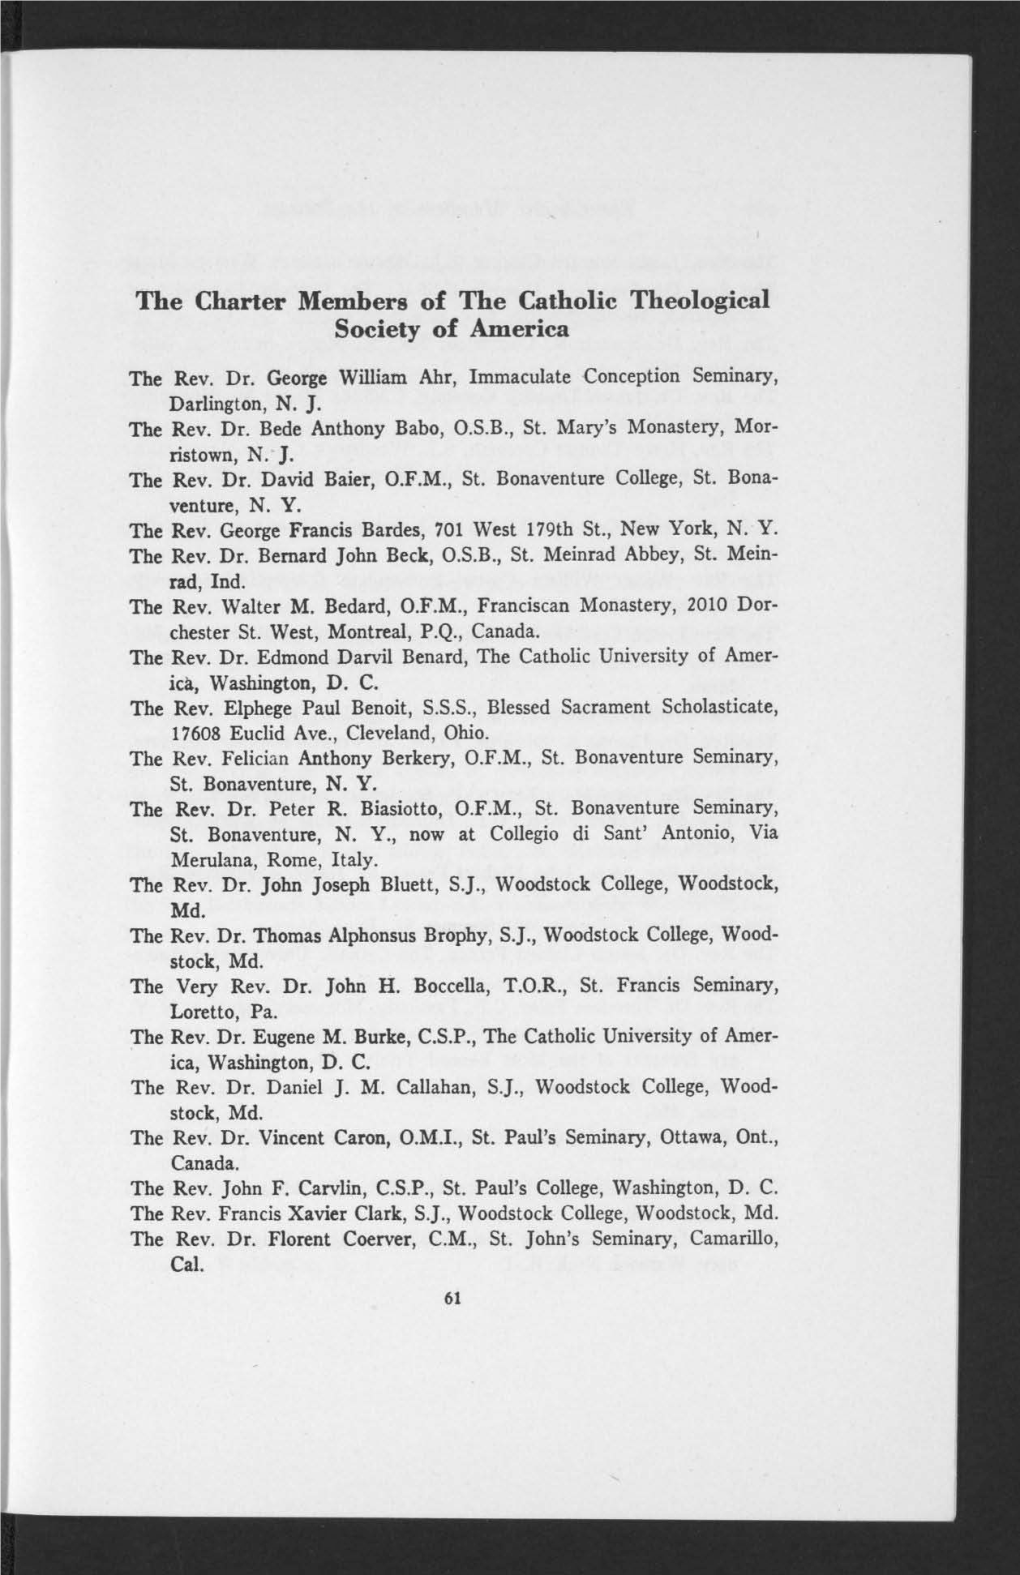 The Charter Members of the Catholic Theological Society of America